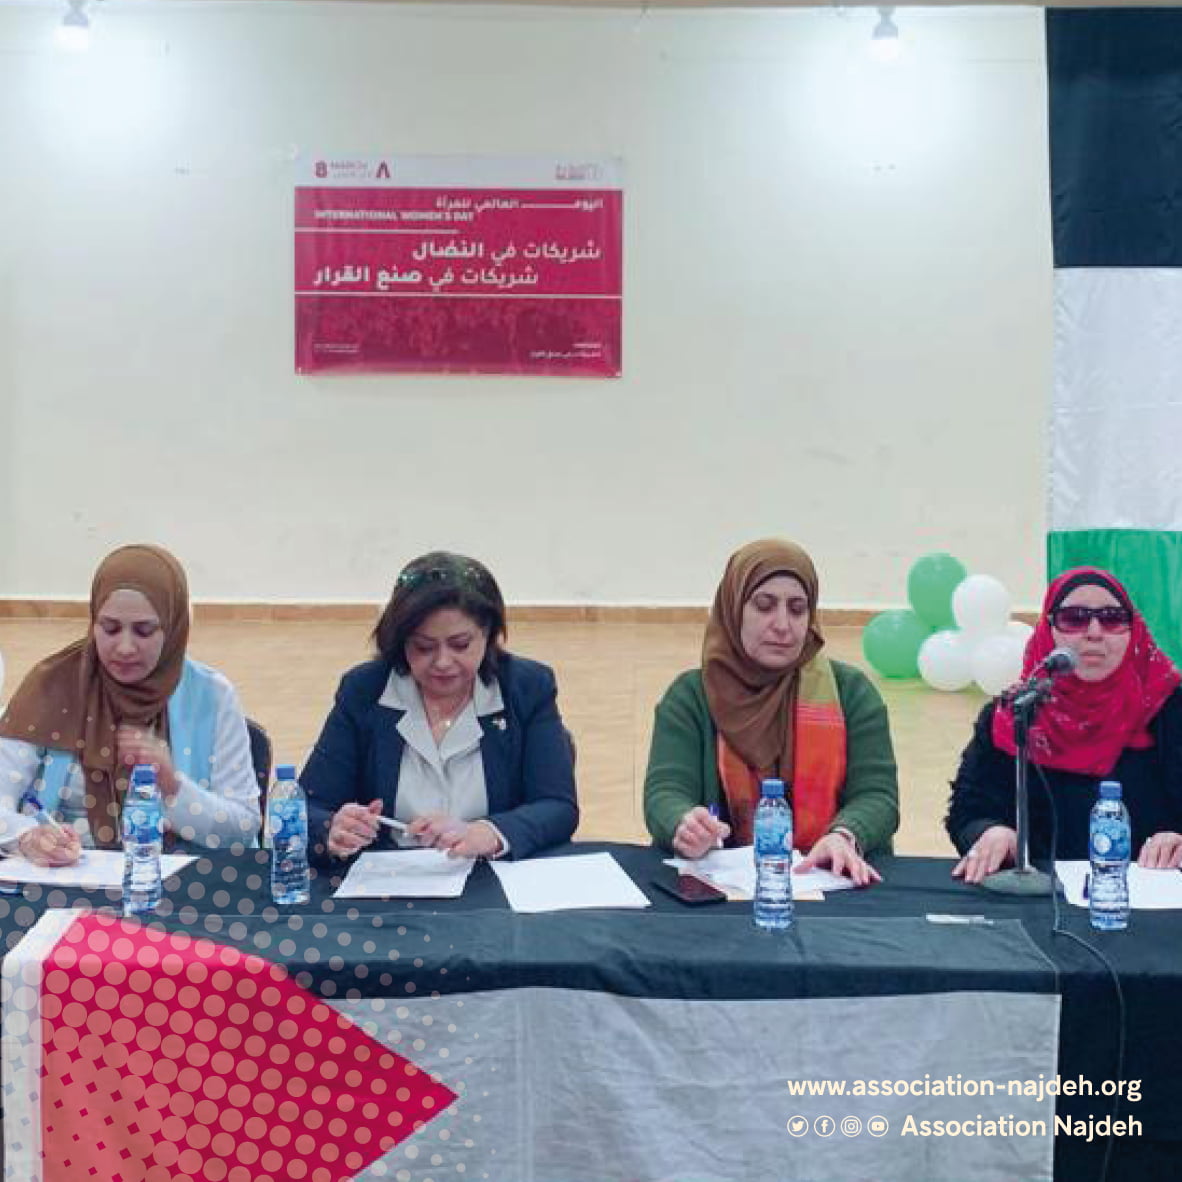 Partners in the struggle are partners in decision-making – in Al-Badawi camp.